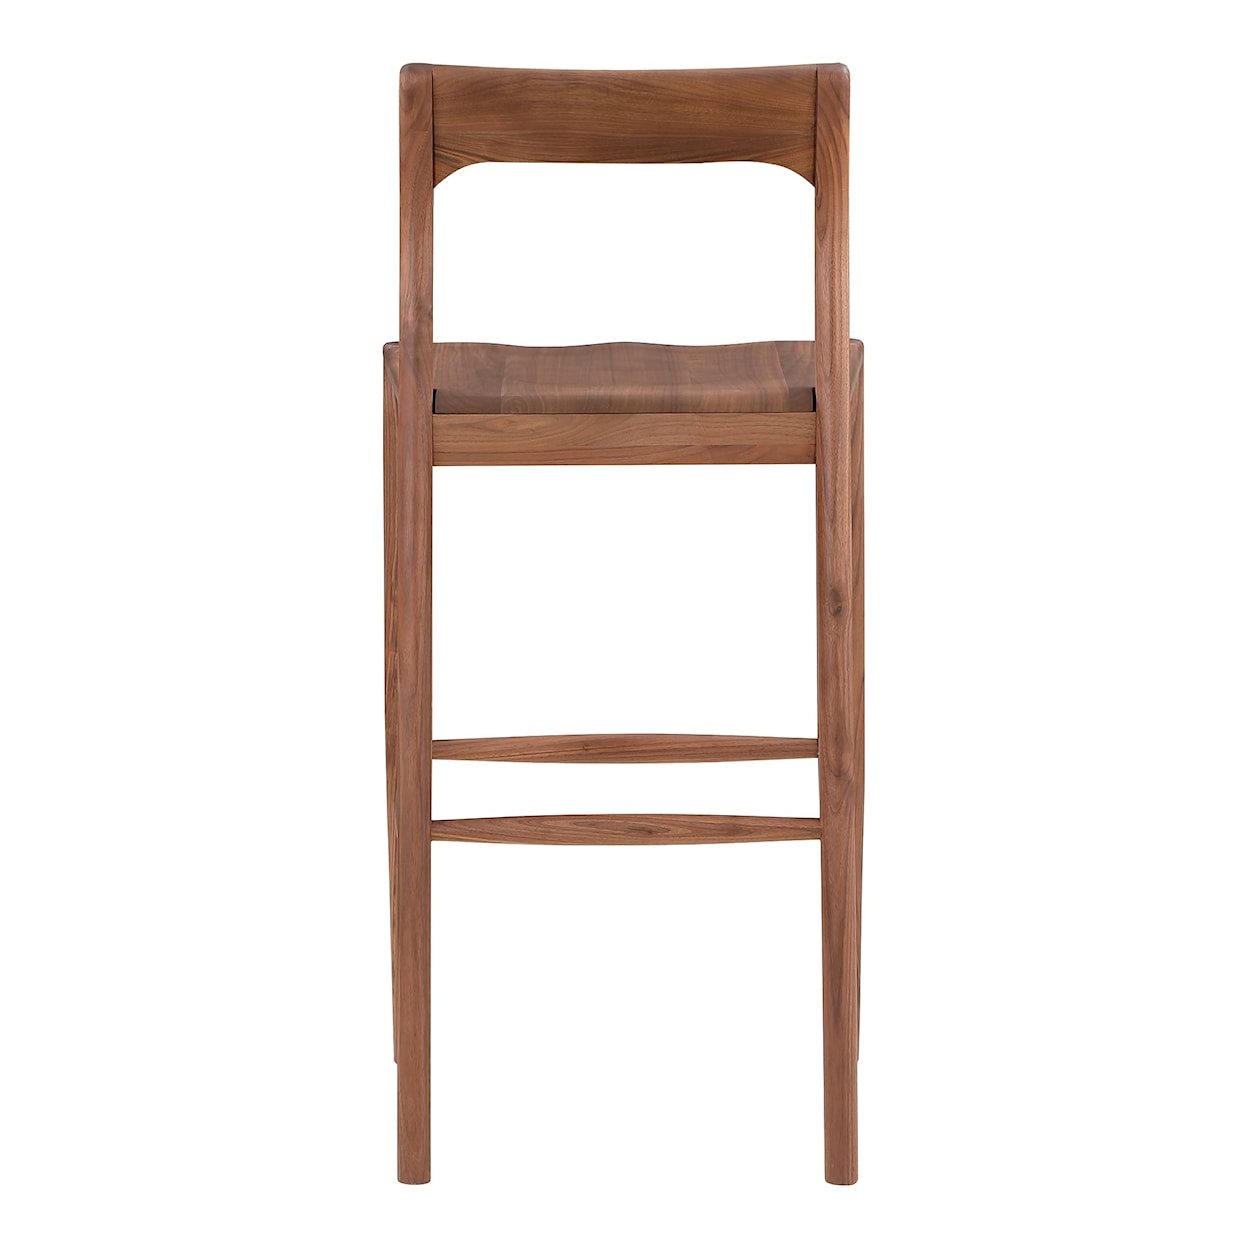 Moe's Home Collection Owing Bar Stool